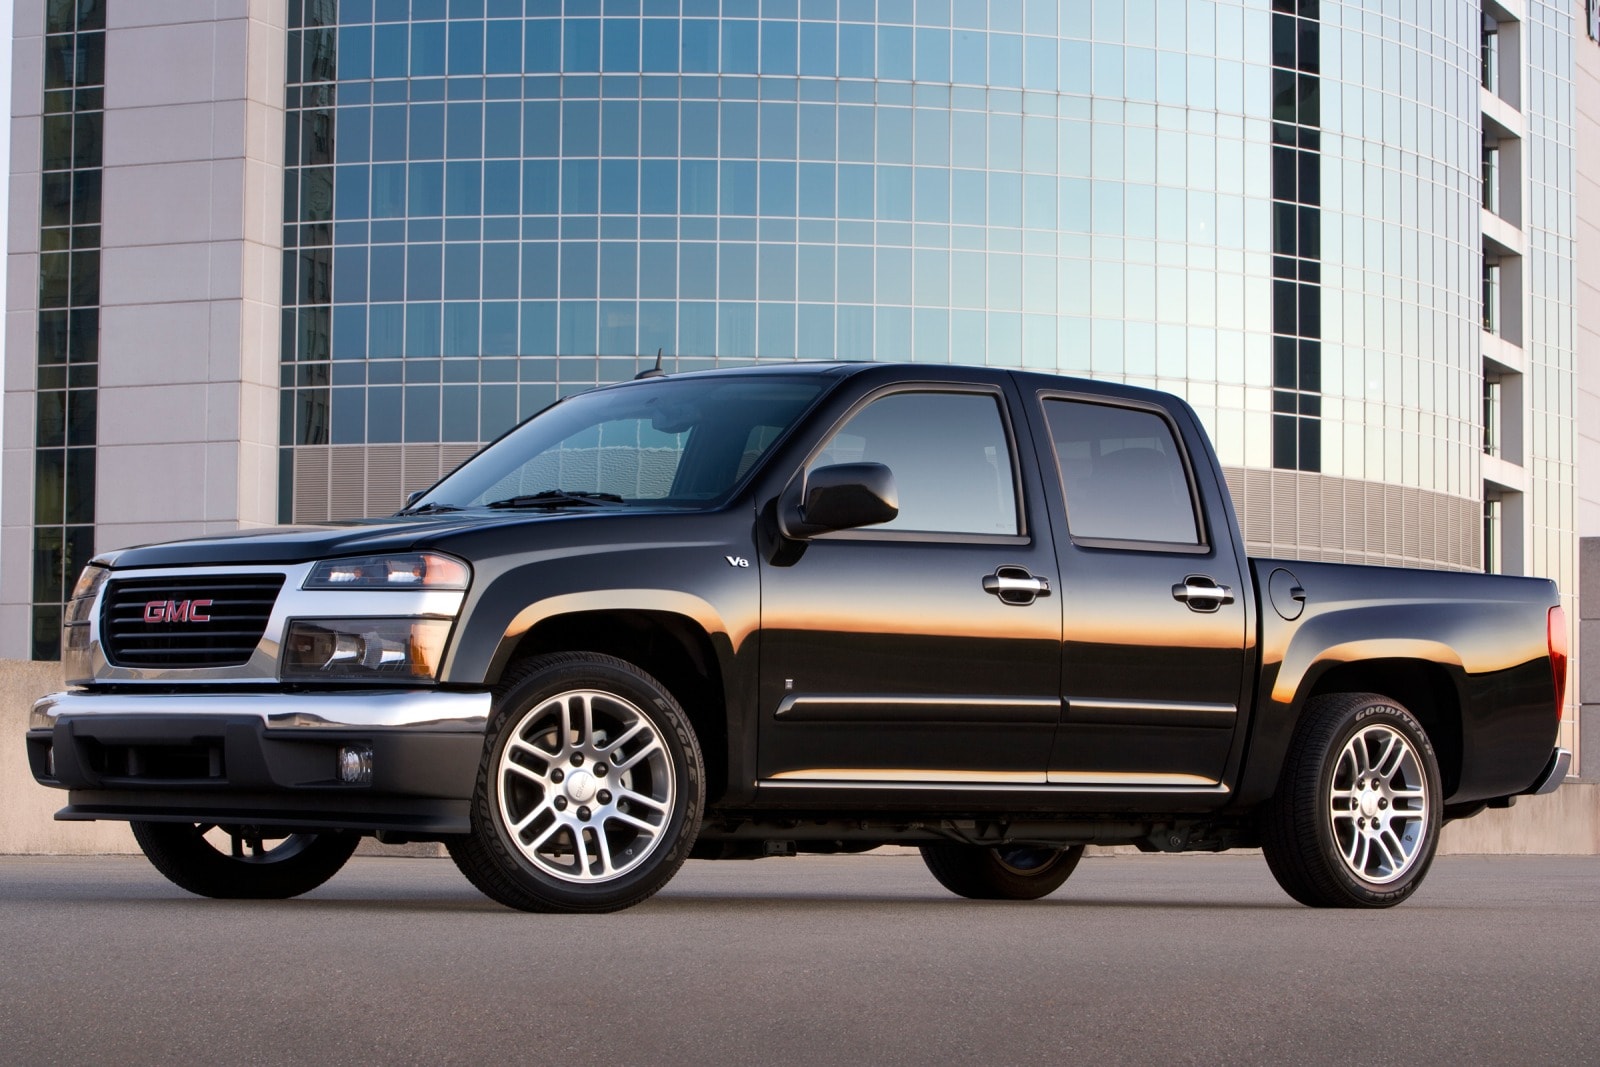 2010 GMC Canyon Review & Ratings | Edmunds